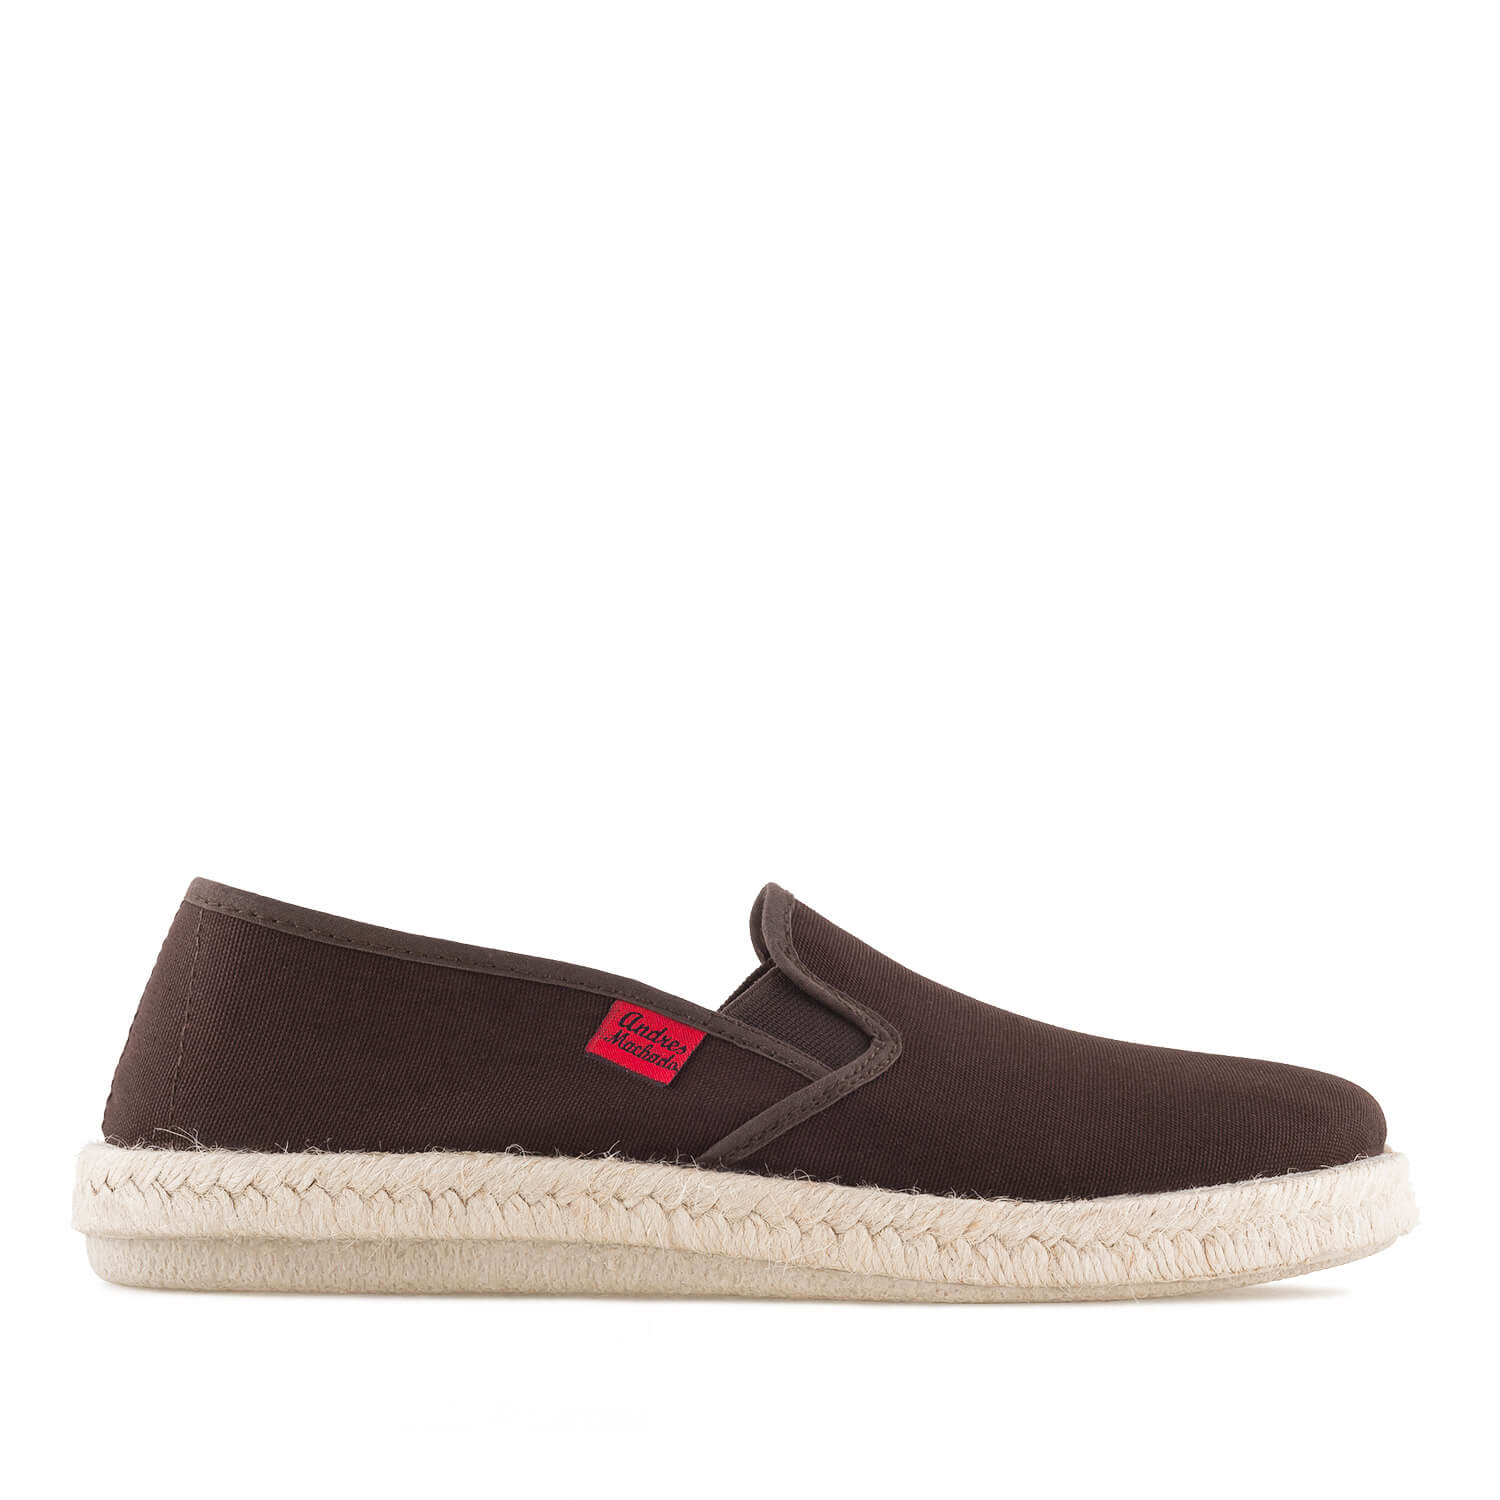 Mythical Brown Canvas Slip-On Shoes with Rubber and Jute Sole 